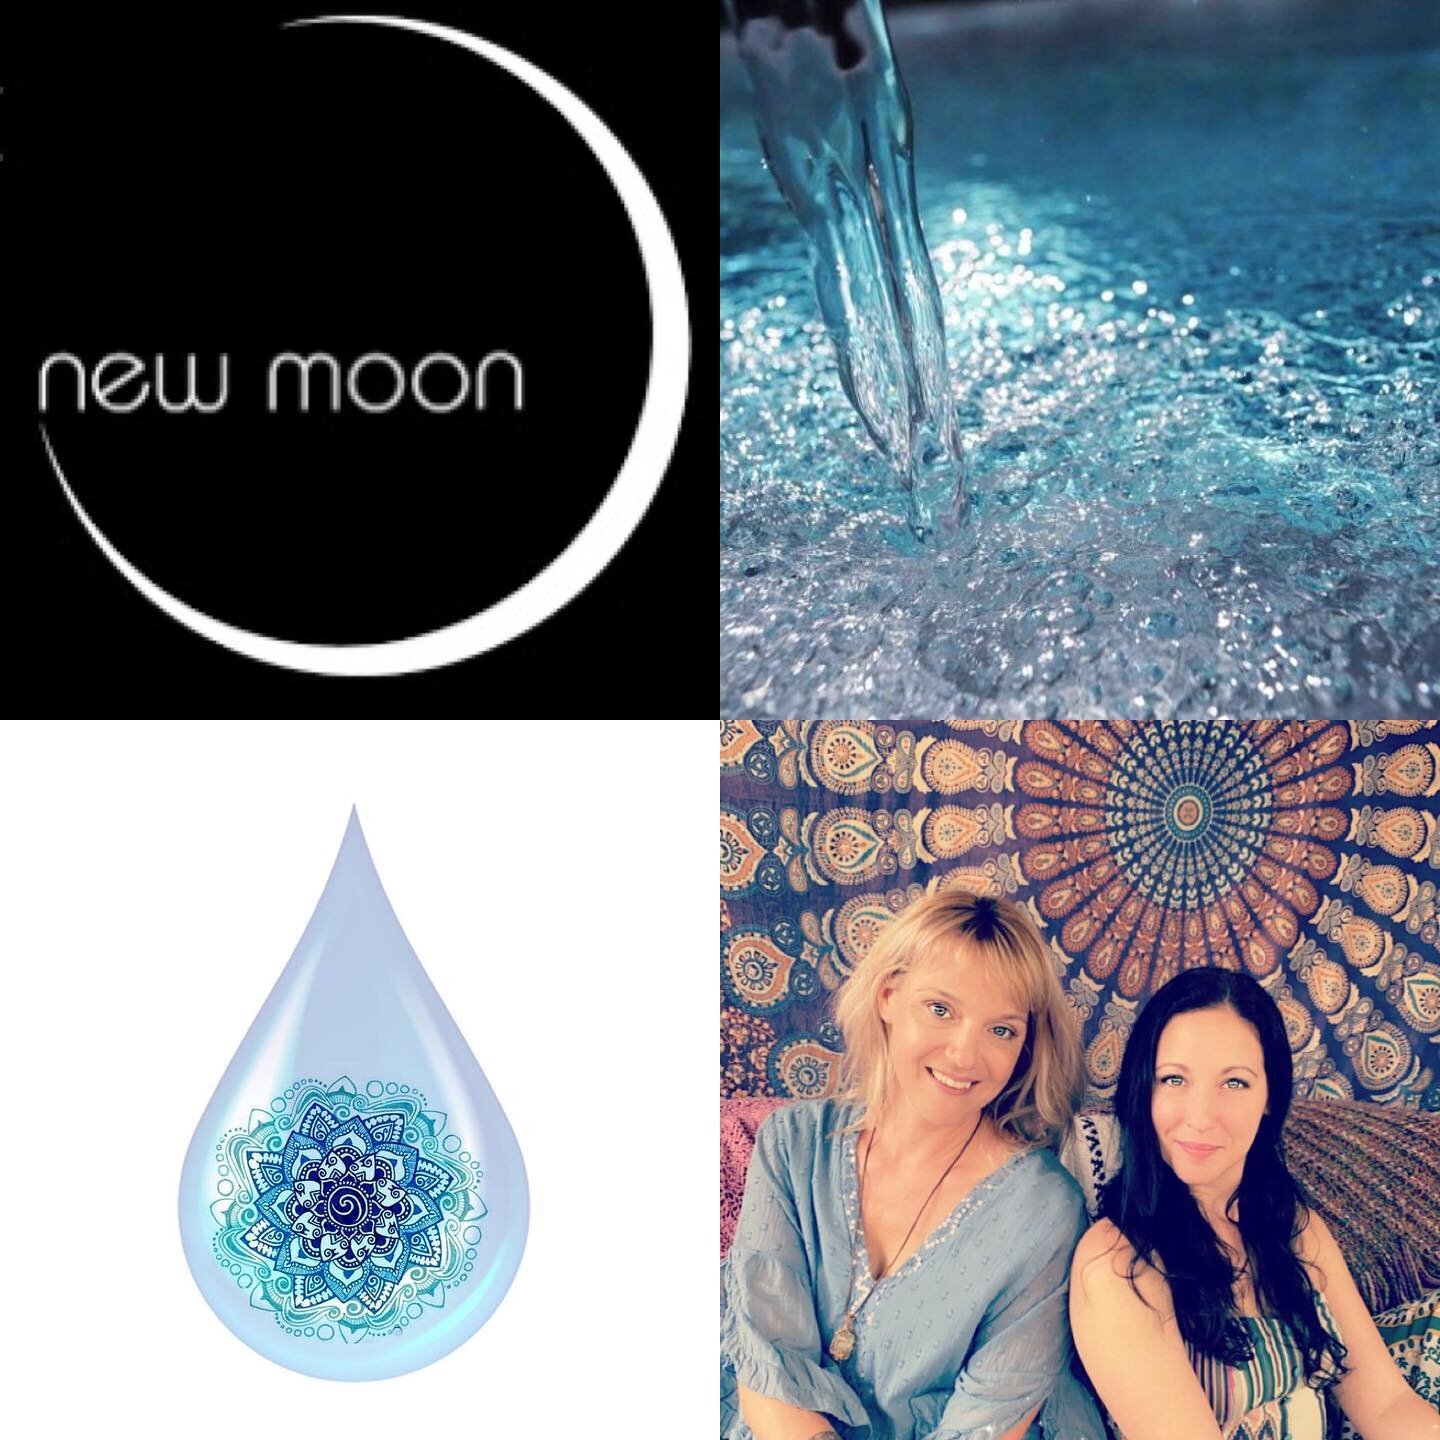 Join @blissreikiarts and me as we harness the power of the new moon energy by using sound healing, gentle yoga postures, a healing water ceremony, and meditation. 
The new moon energy is a great time to refresh, refocus, and renew!

DM for details! 
